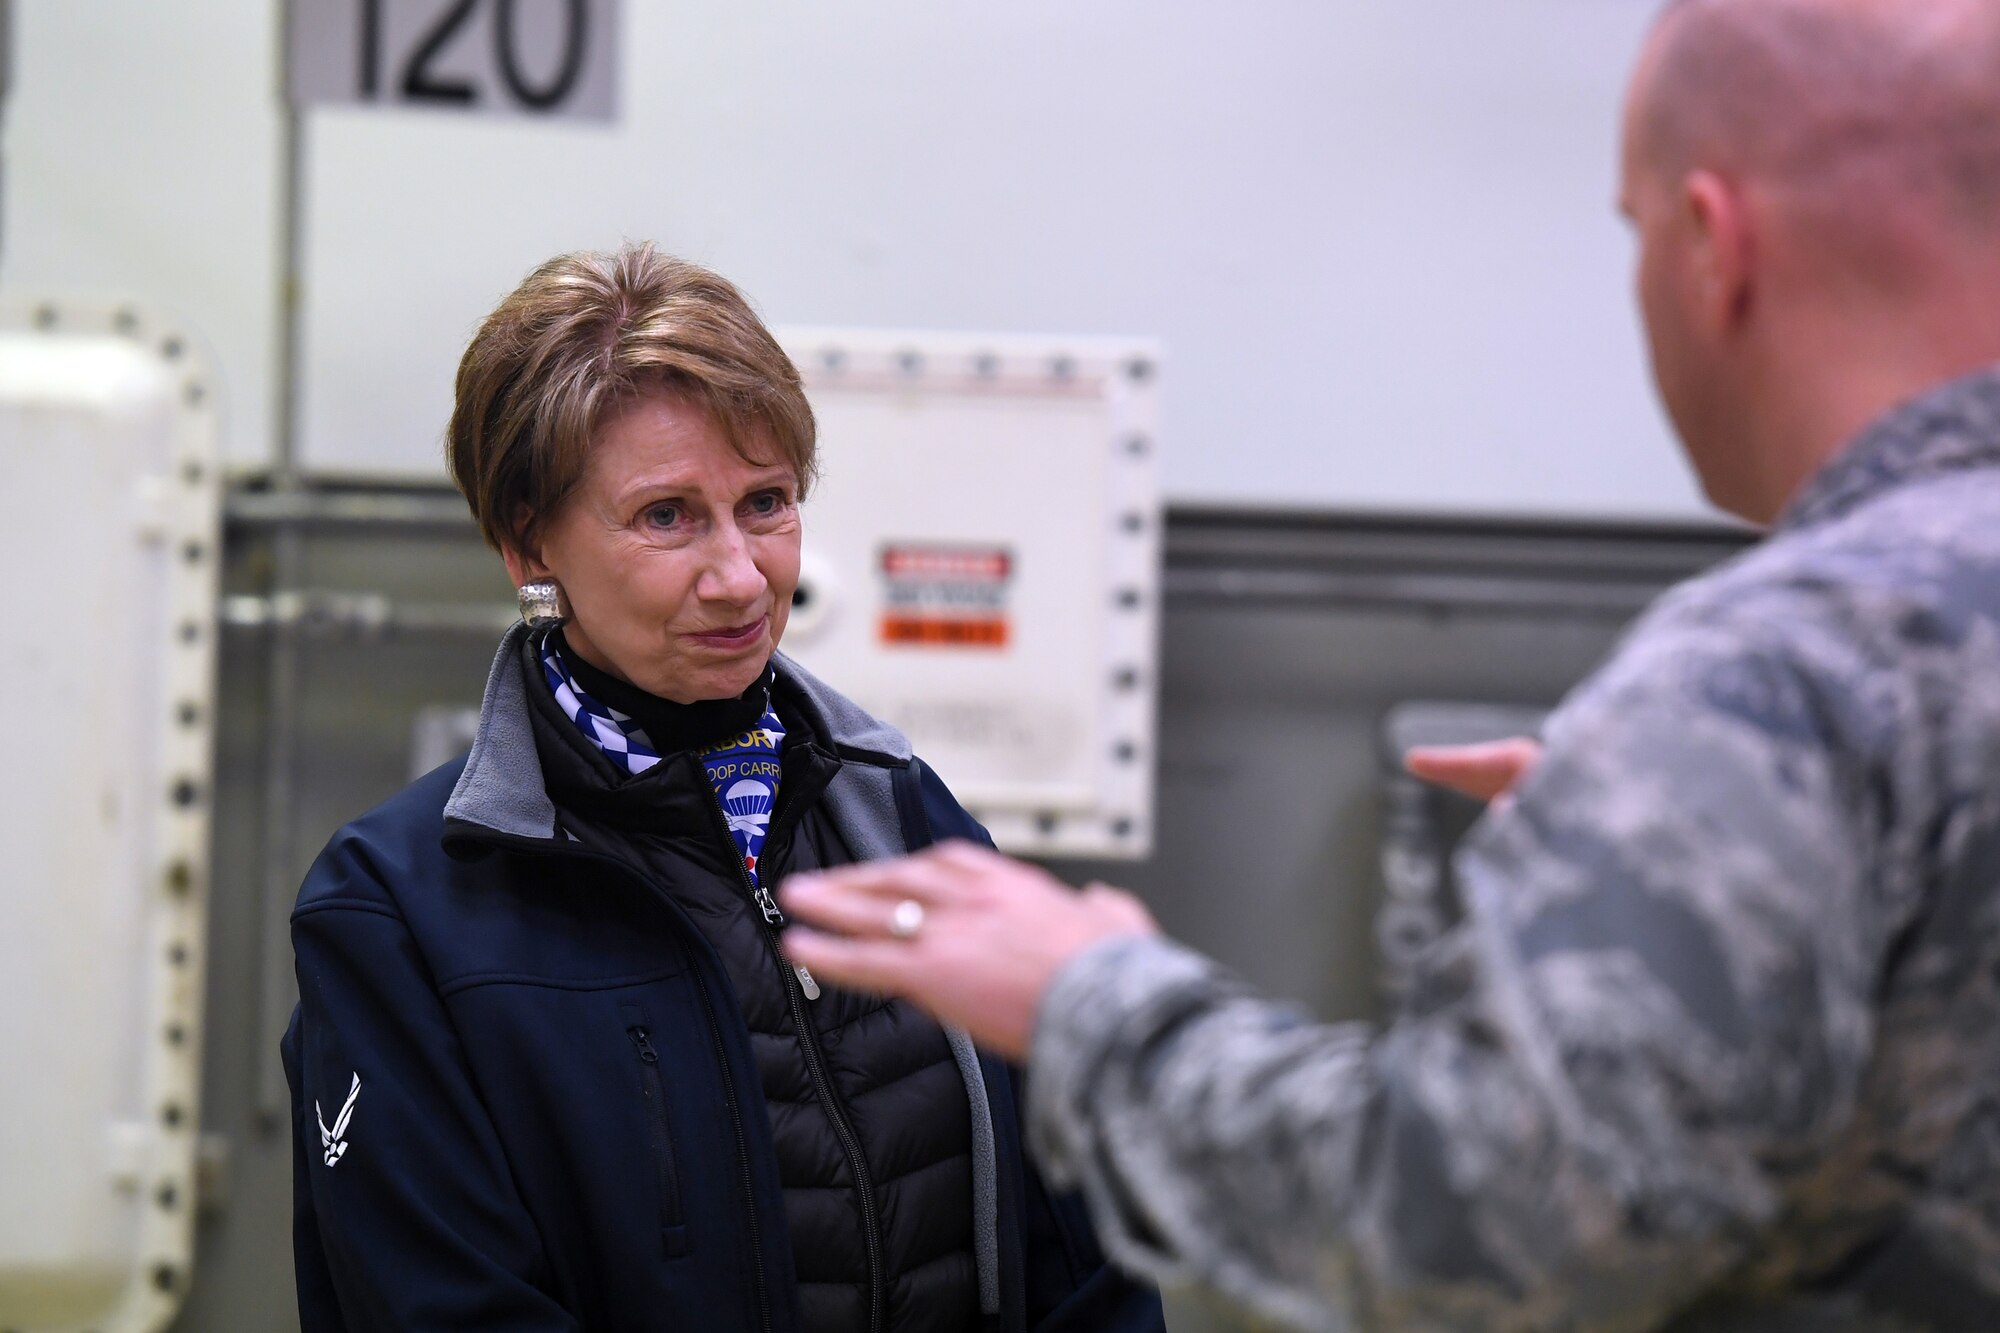 Secretary of the Air Force Barbara M. Barrett receives an overview of the nuclear university training facility from Lt. Col. Eric Golden, U.S. Air Forces in Europe and Air Forces Africa deputy chief of nuclear operations, during a base visit at Ramstein Air Base, Germany, Nov. 22, 2019.